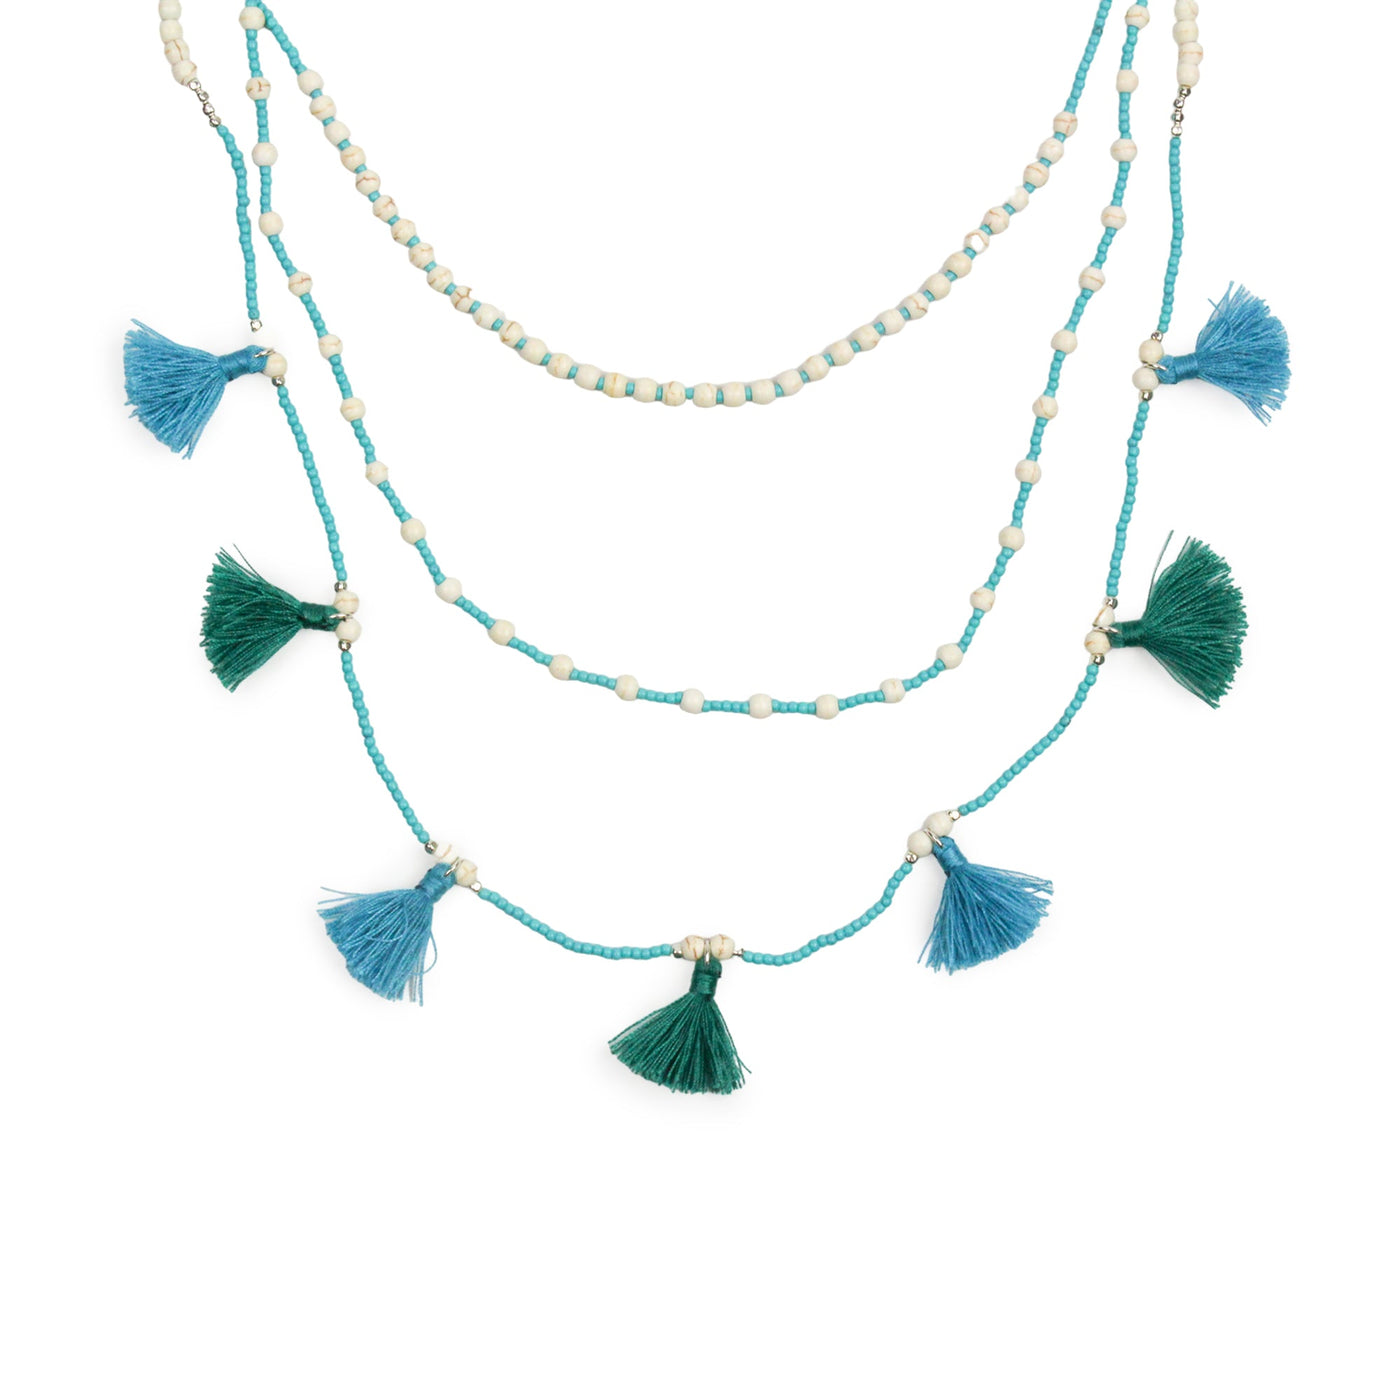 Bali Garland Necklace - Turquoise